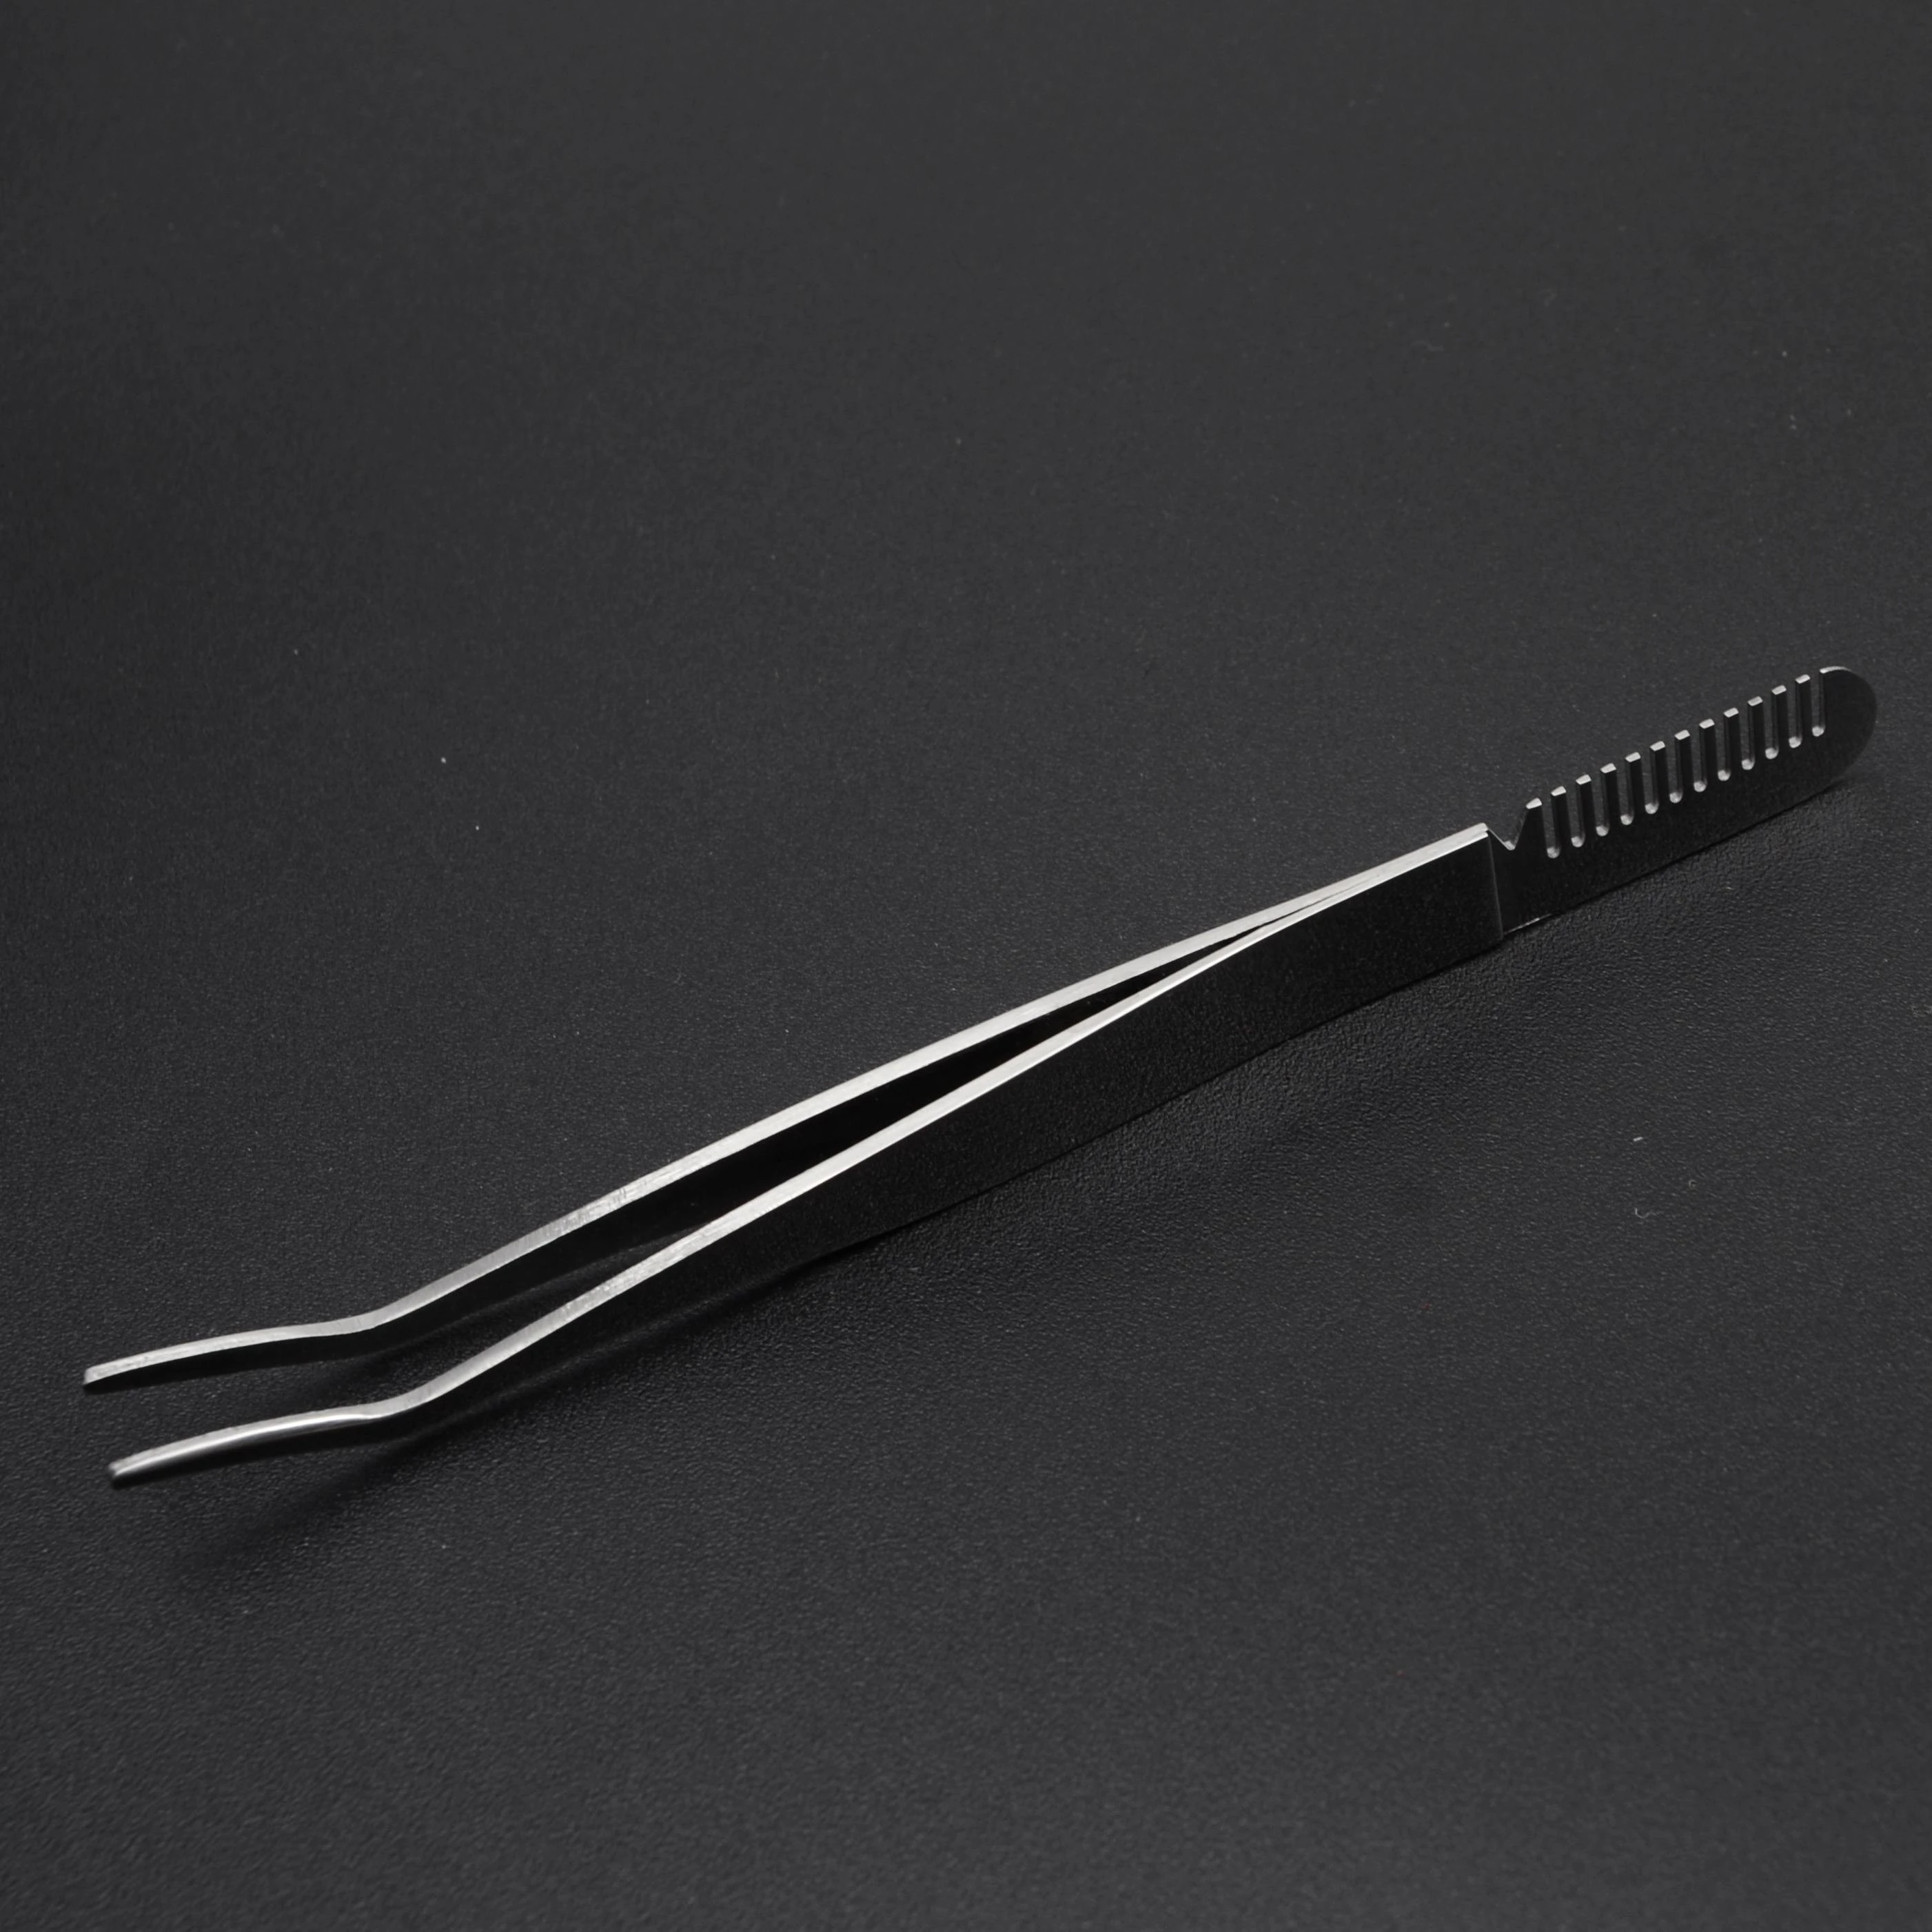 Private Label Compact Make-up Tool Quality Stainless Steel 2 In 1 False Eyelash Extension Eyebrow Hair Tweezers with Comb